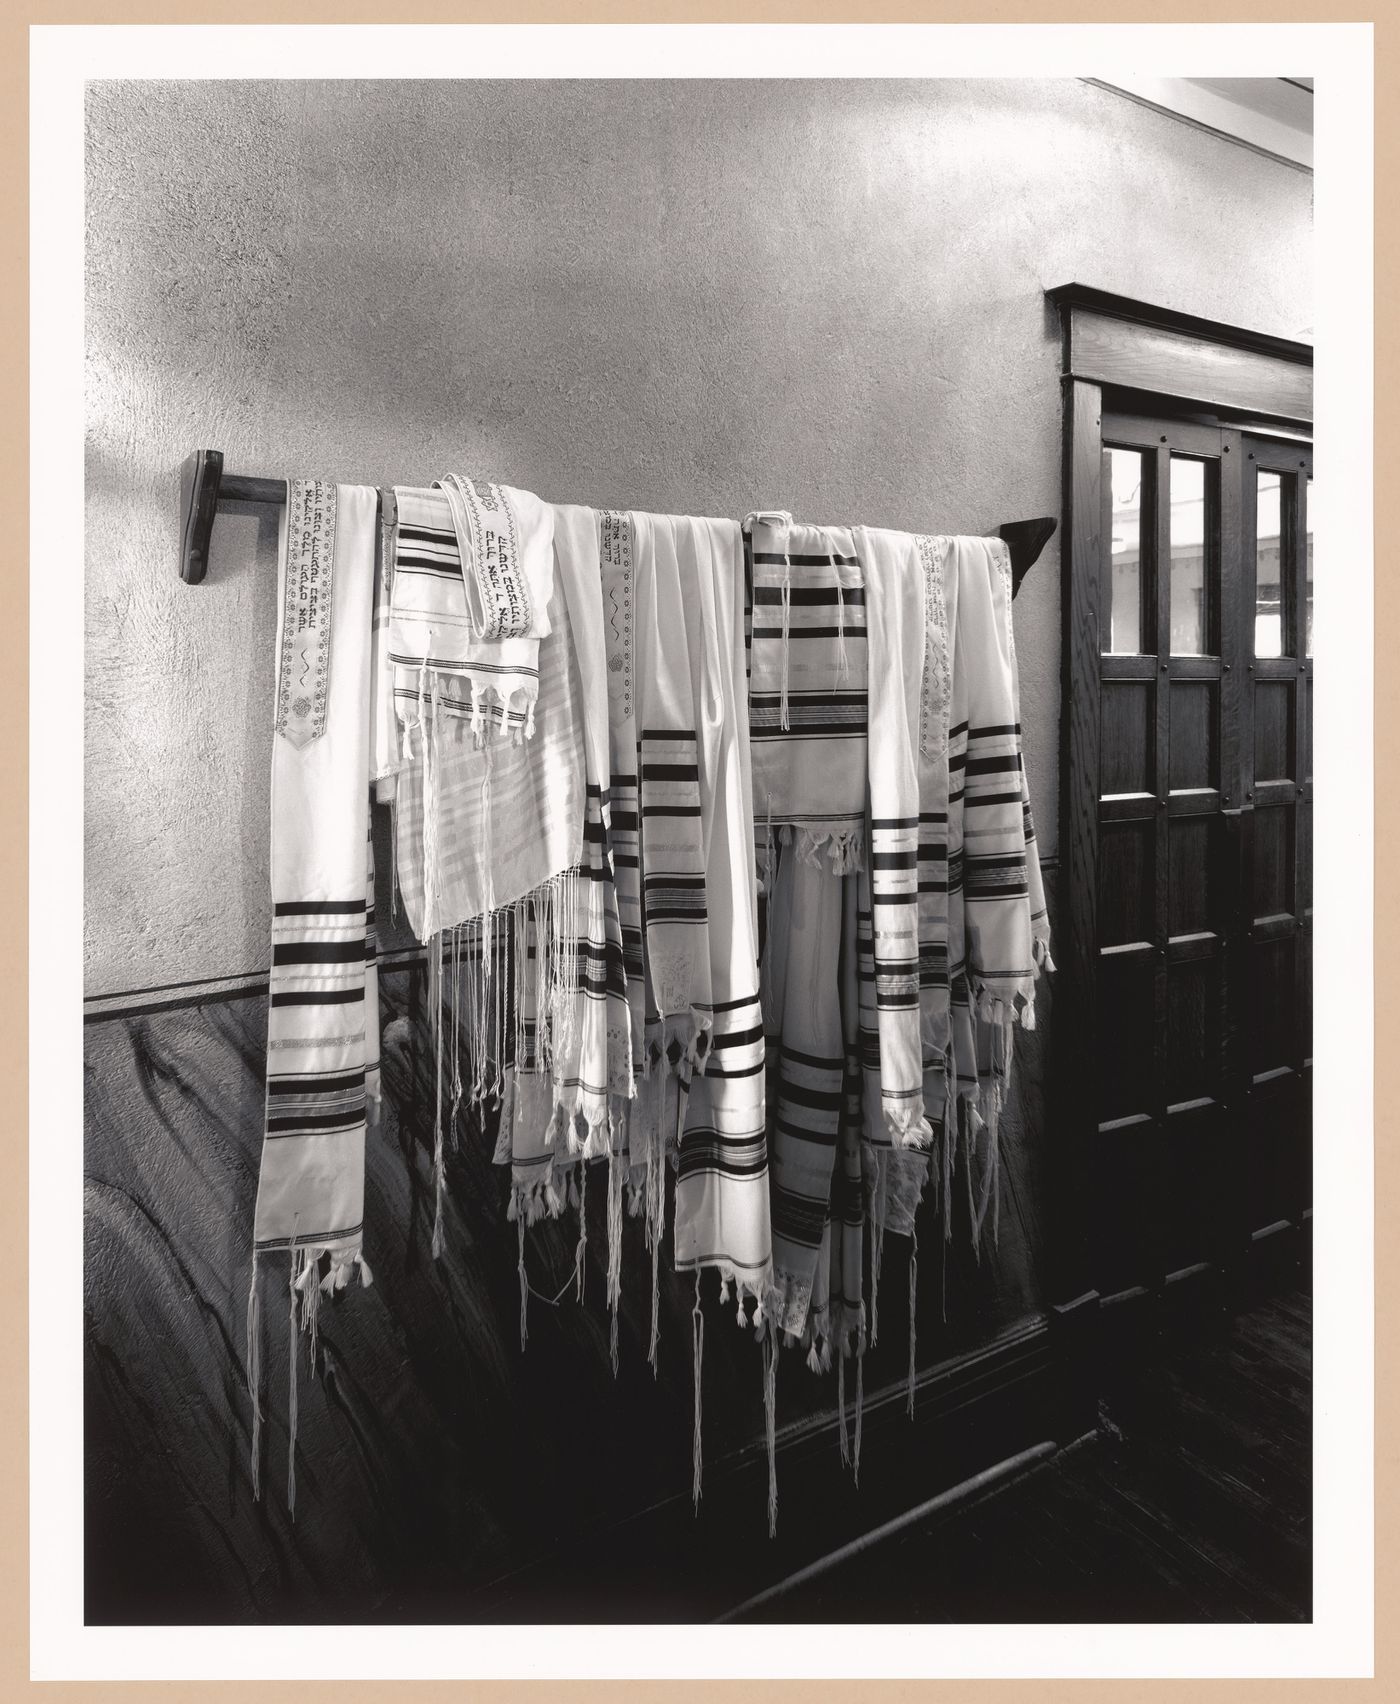 Instruments of Faith: View of Prayer shawls in the foyer, Knesseth Israel Synagogue, Toronto